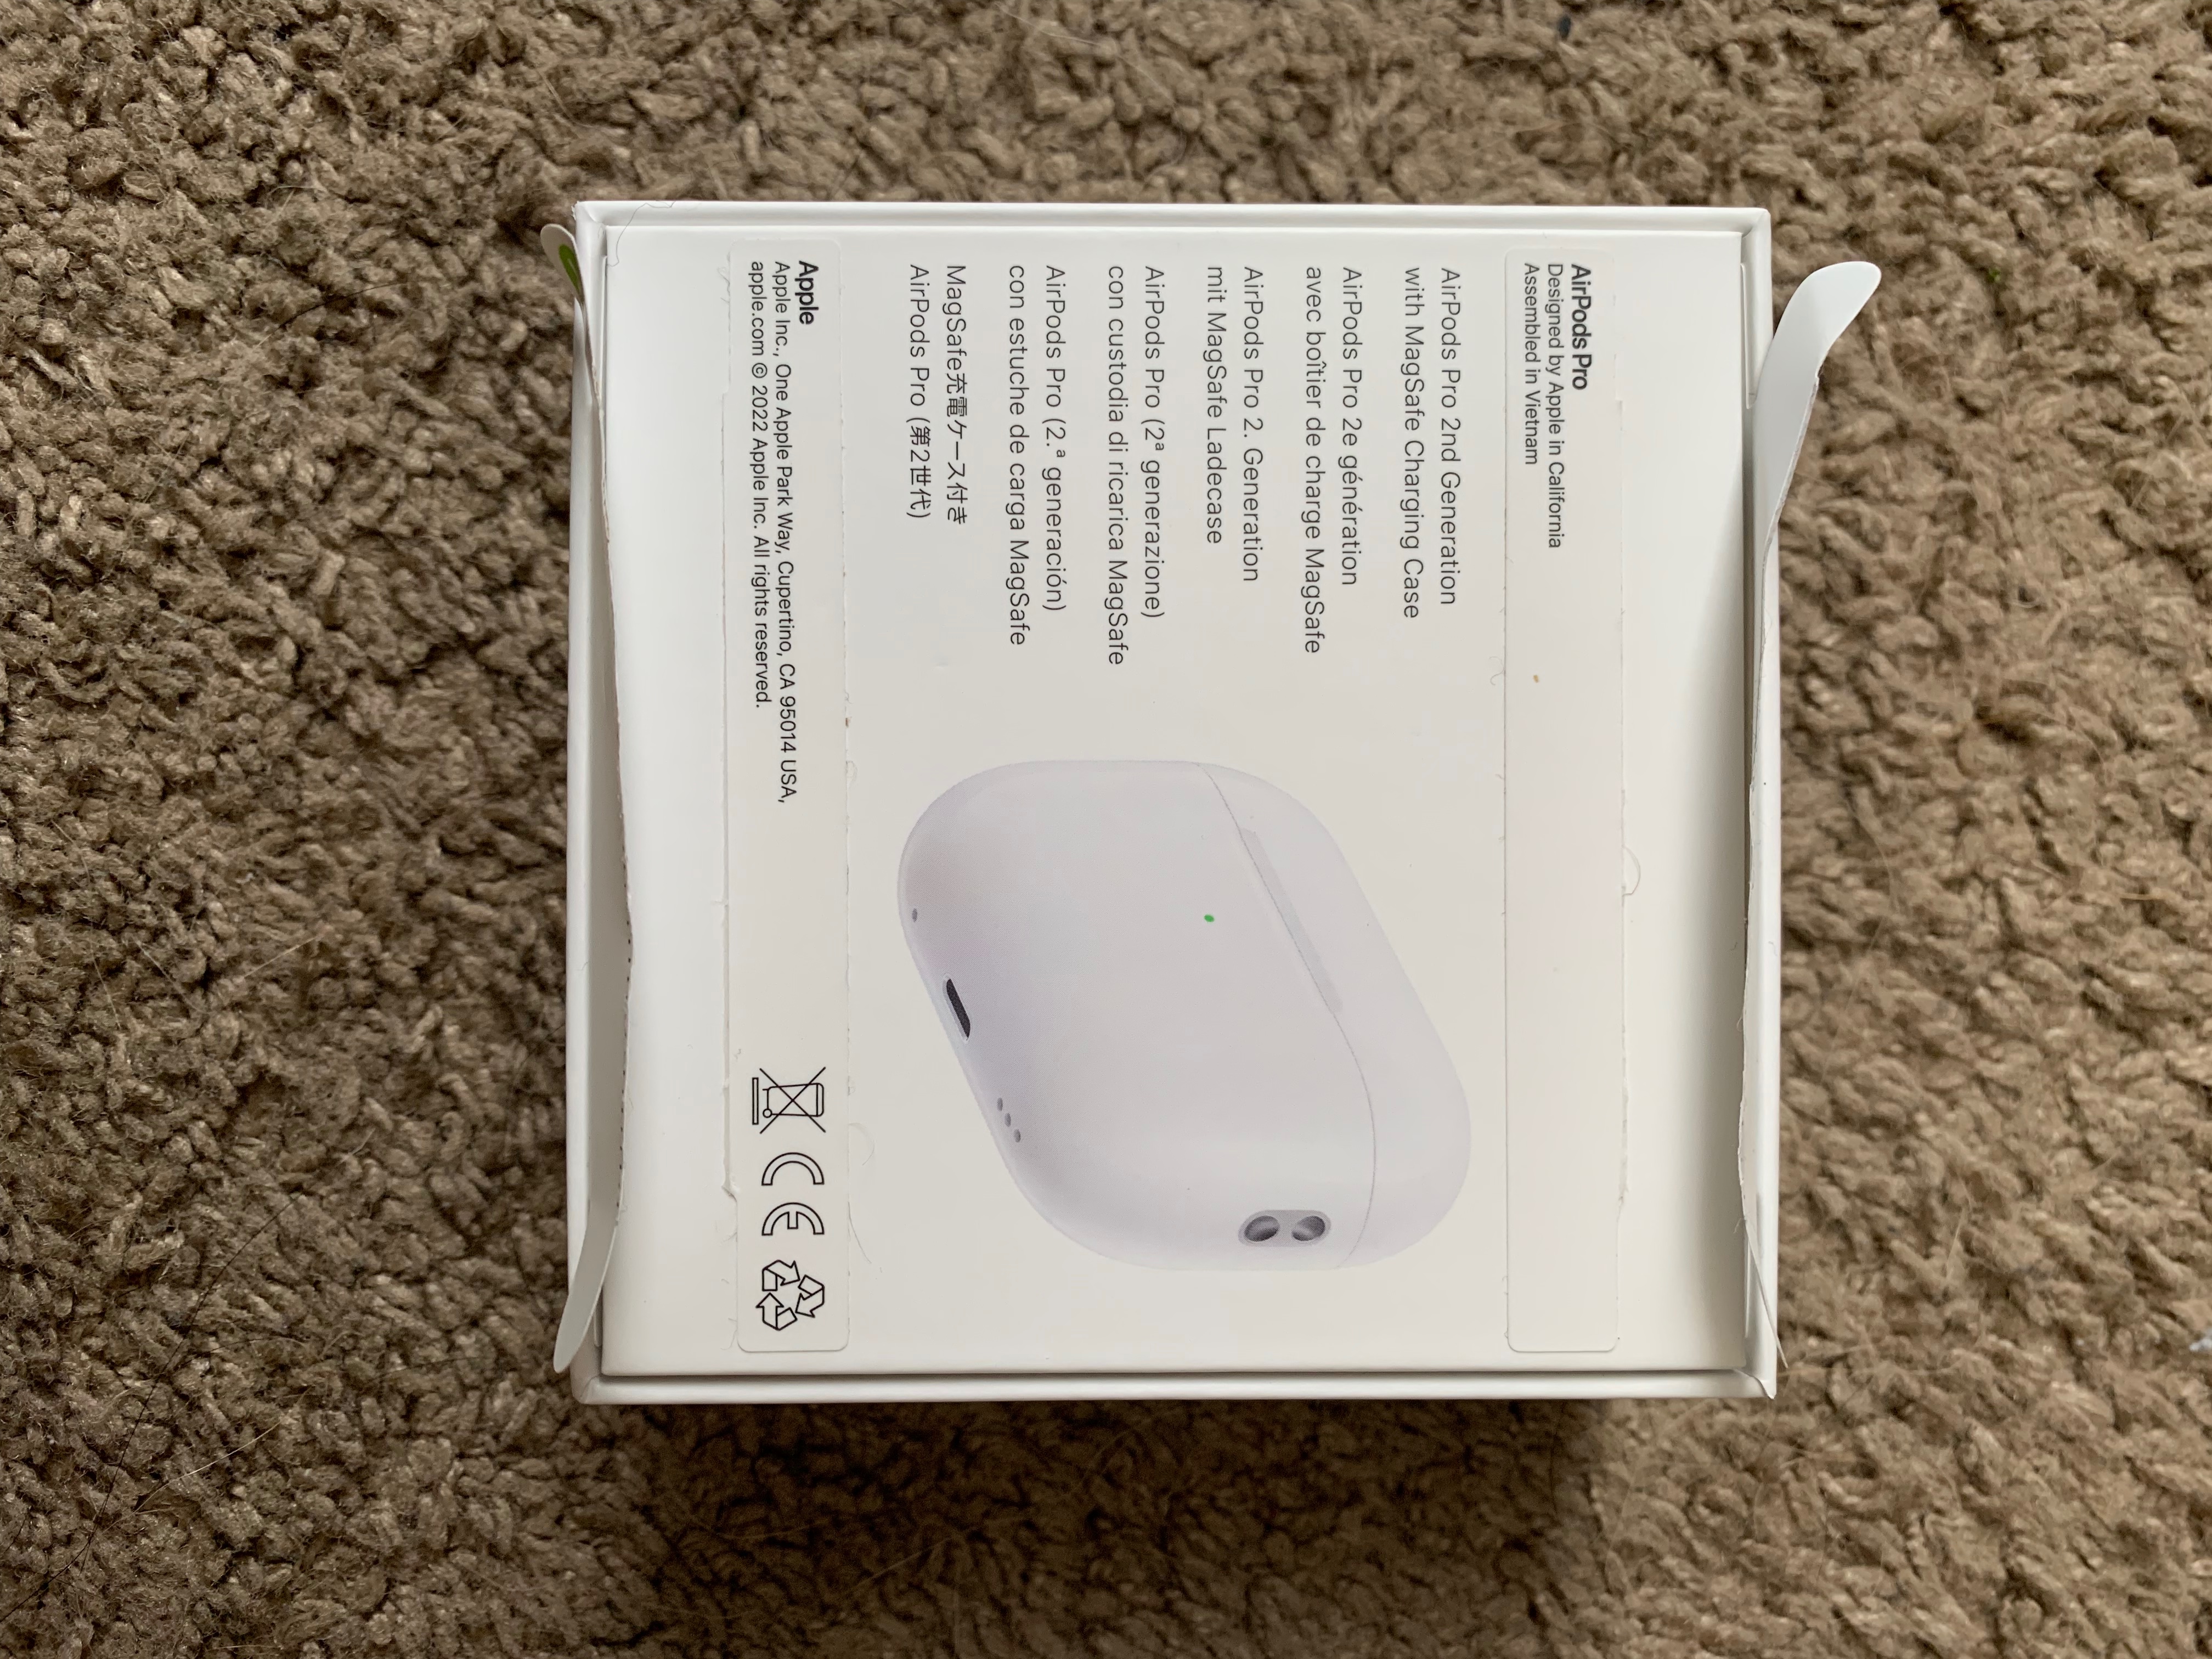  AirPods Pro (2nd Generation) with MagSafe Charging Case